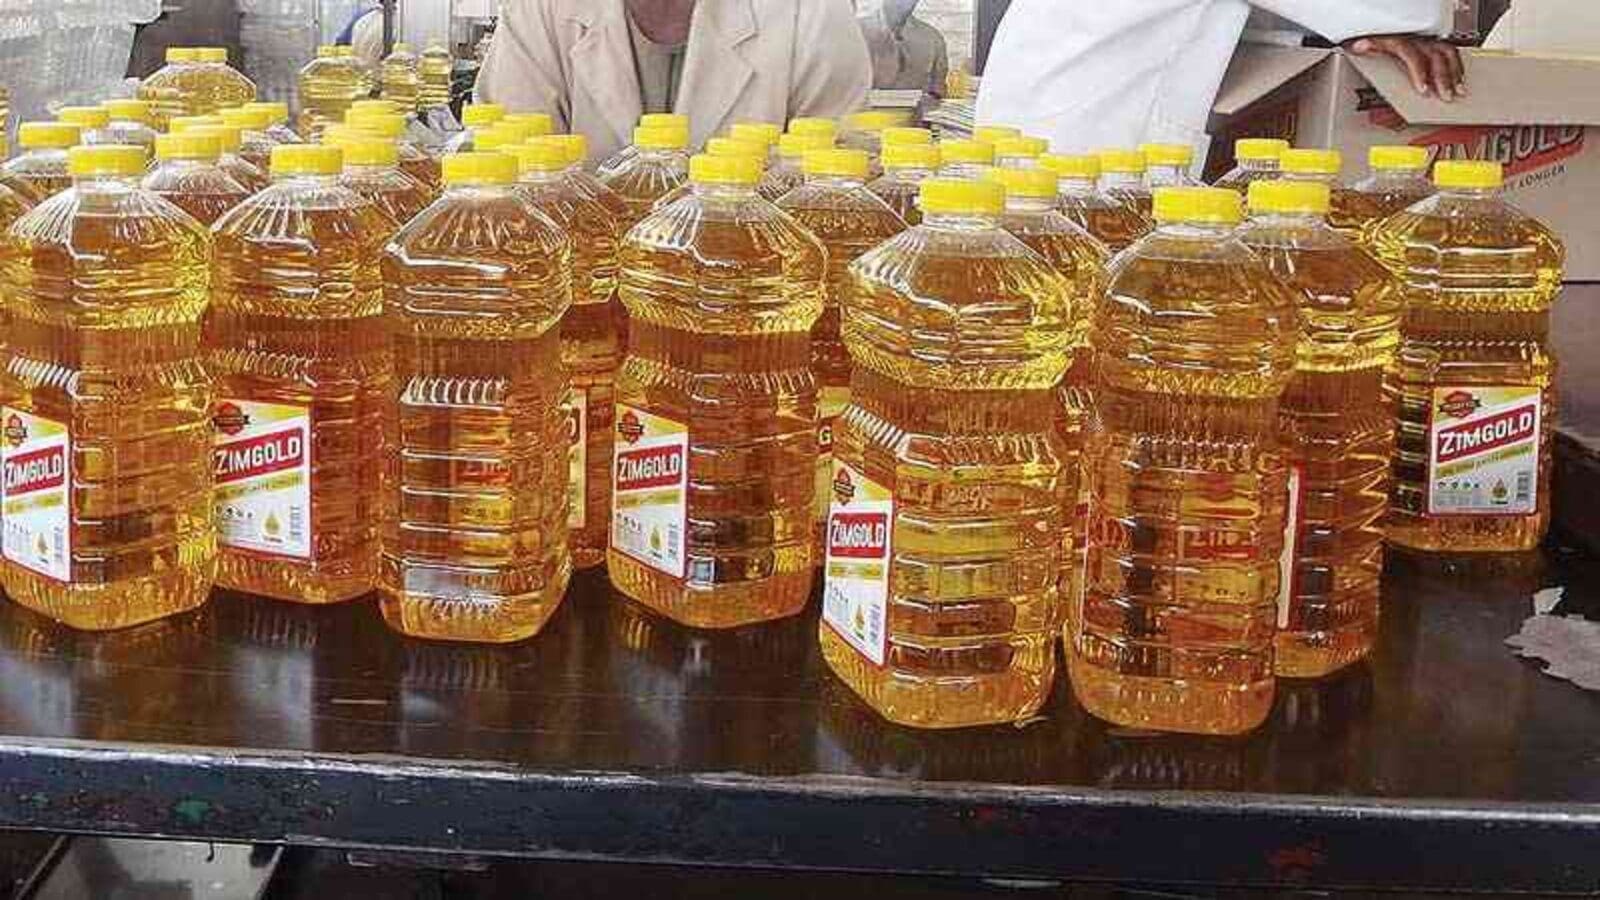 Zimgold undaunted after the government lifts restrictions on the importation of cheaper cooking oil